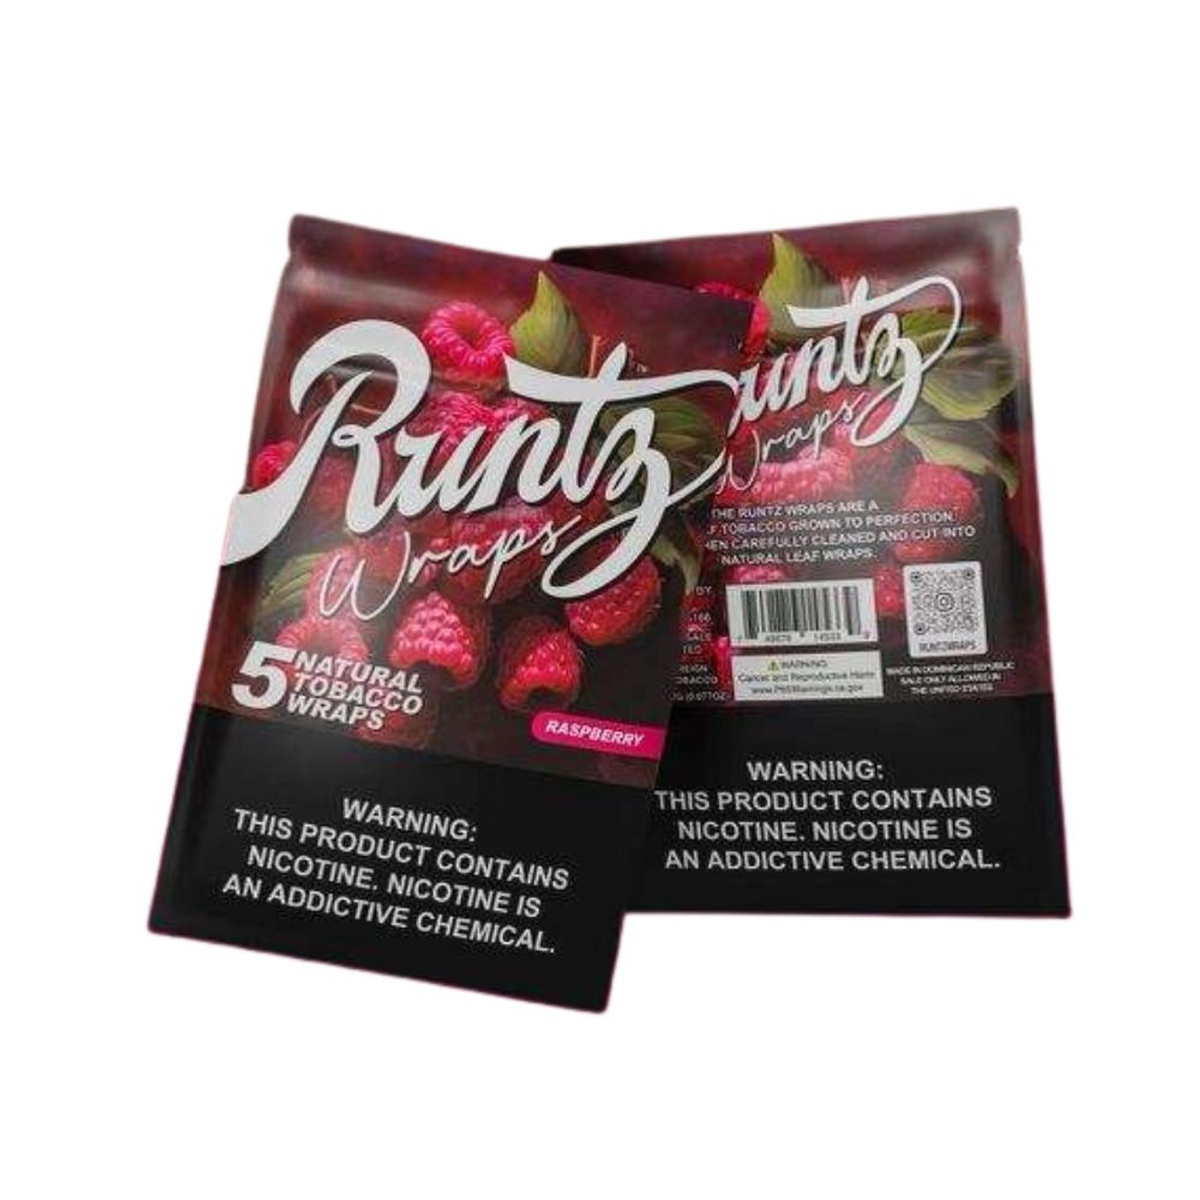 Sweet Sensation: The Rise and Popularity of Runtz Wraps in Smoking Culture